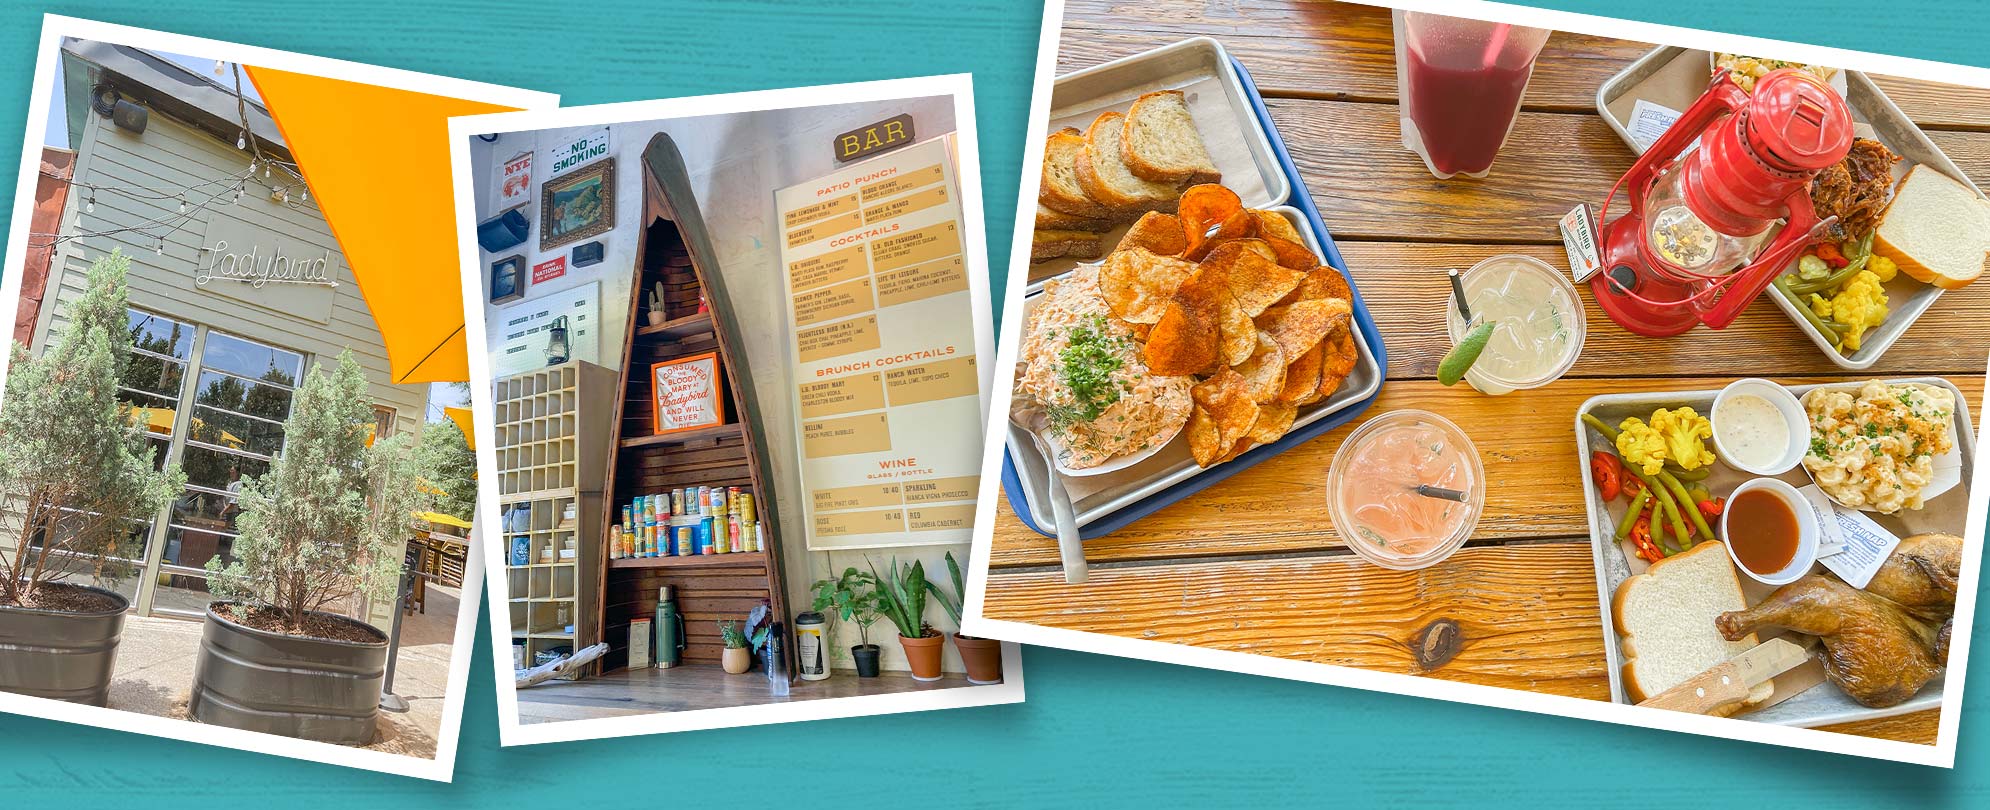 Three snapshots on a teal background showing an outside patio area at Ladybird Grove & Mess Hall, ahalf canoe wall art feature next to a large wall menu, and a wooden table with a lantern and meal trays.